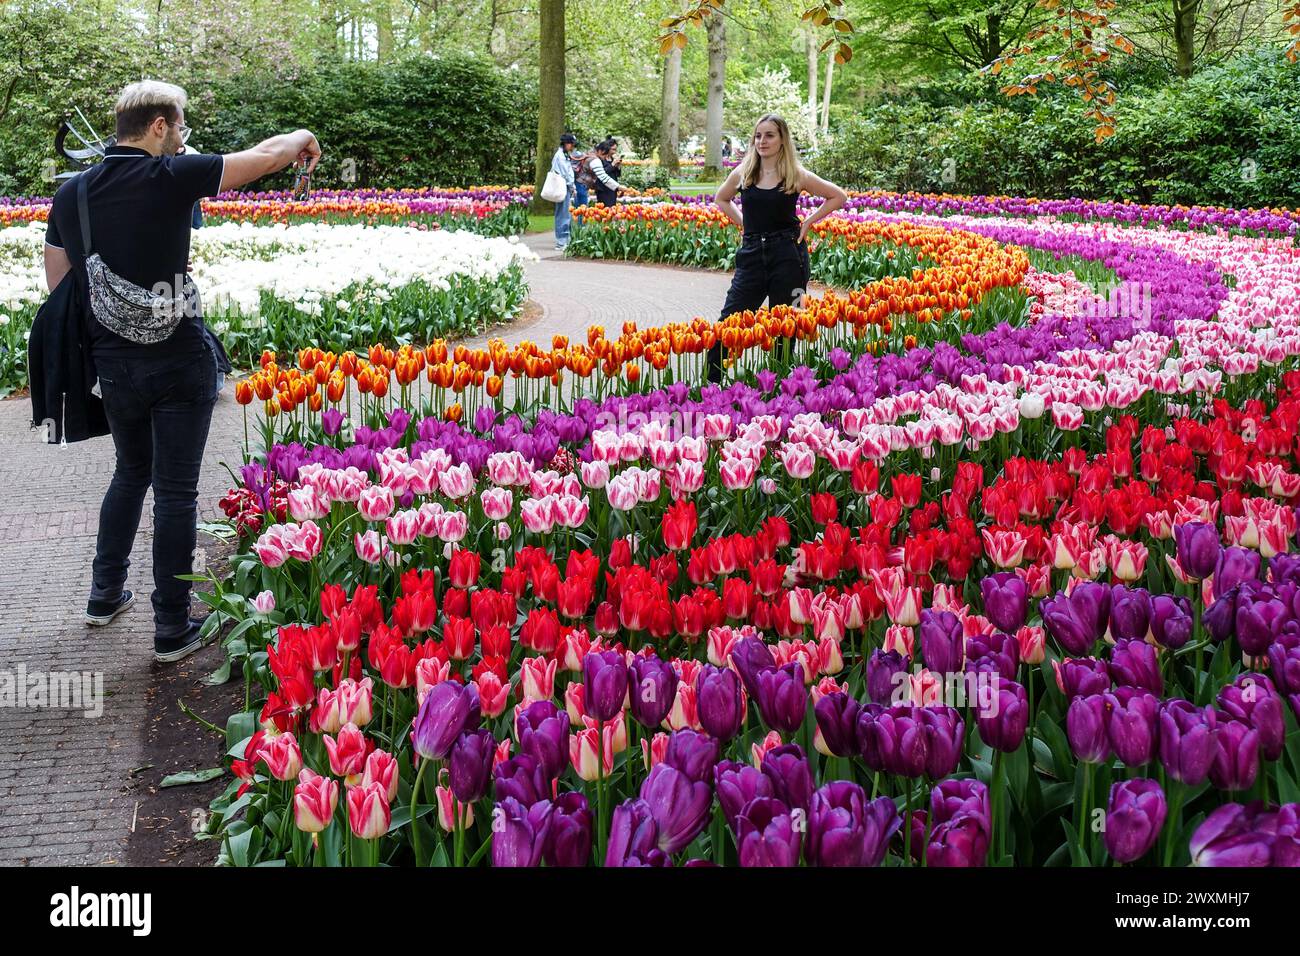 Photographer taking a picture of a woman posing among vibrant and colorful tulips at a the Keukenhof gardens, Lisse, Netherlands Stock Photo